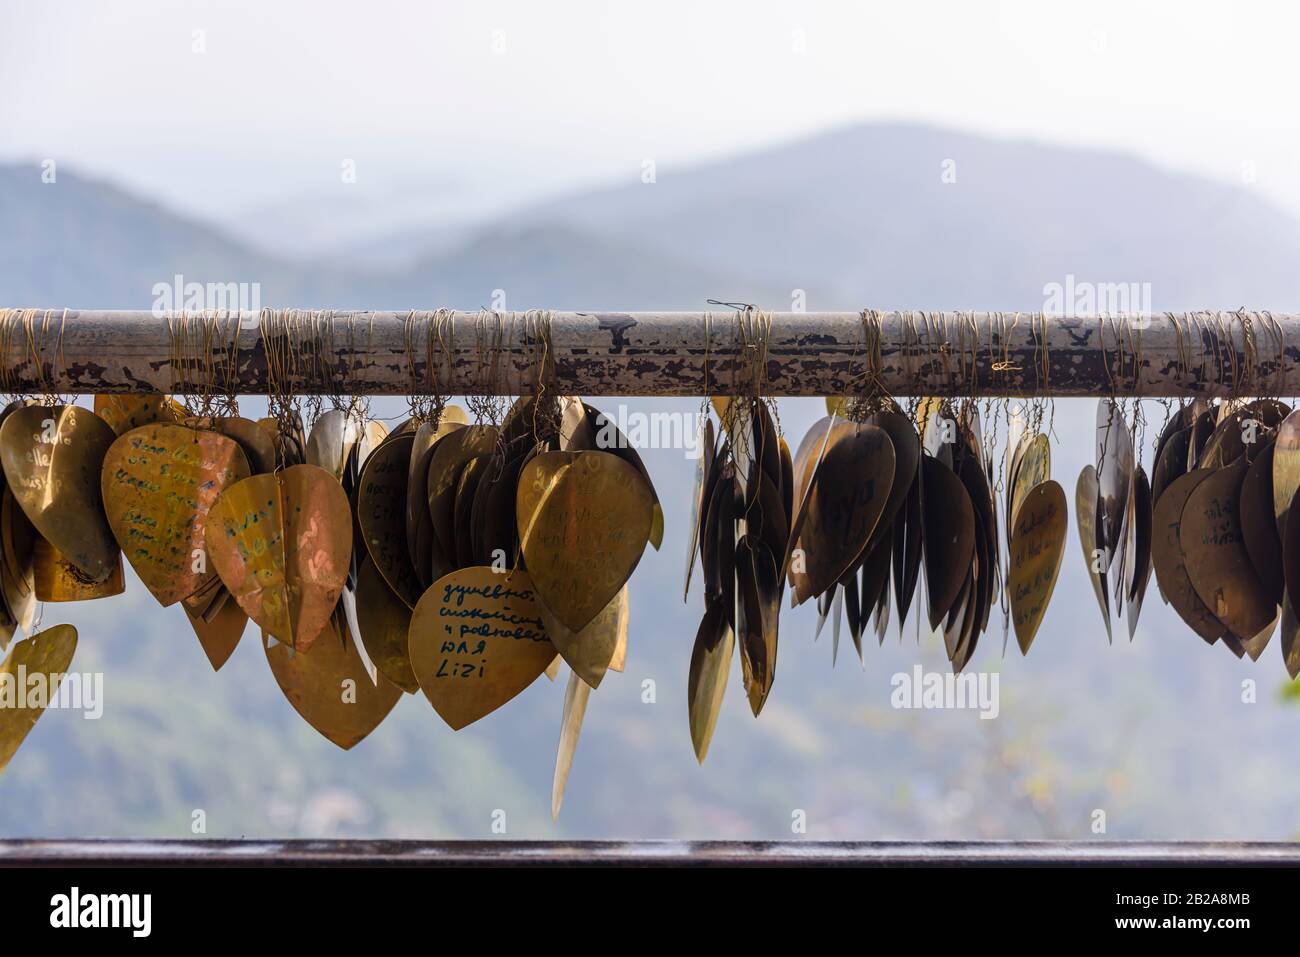 Messages of peace and love written on bronze hearts at the Big Buddha, Phuket, Thailand Stock Photo